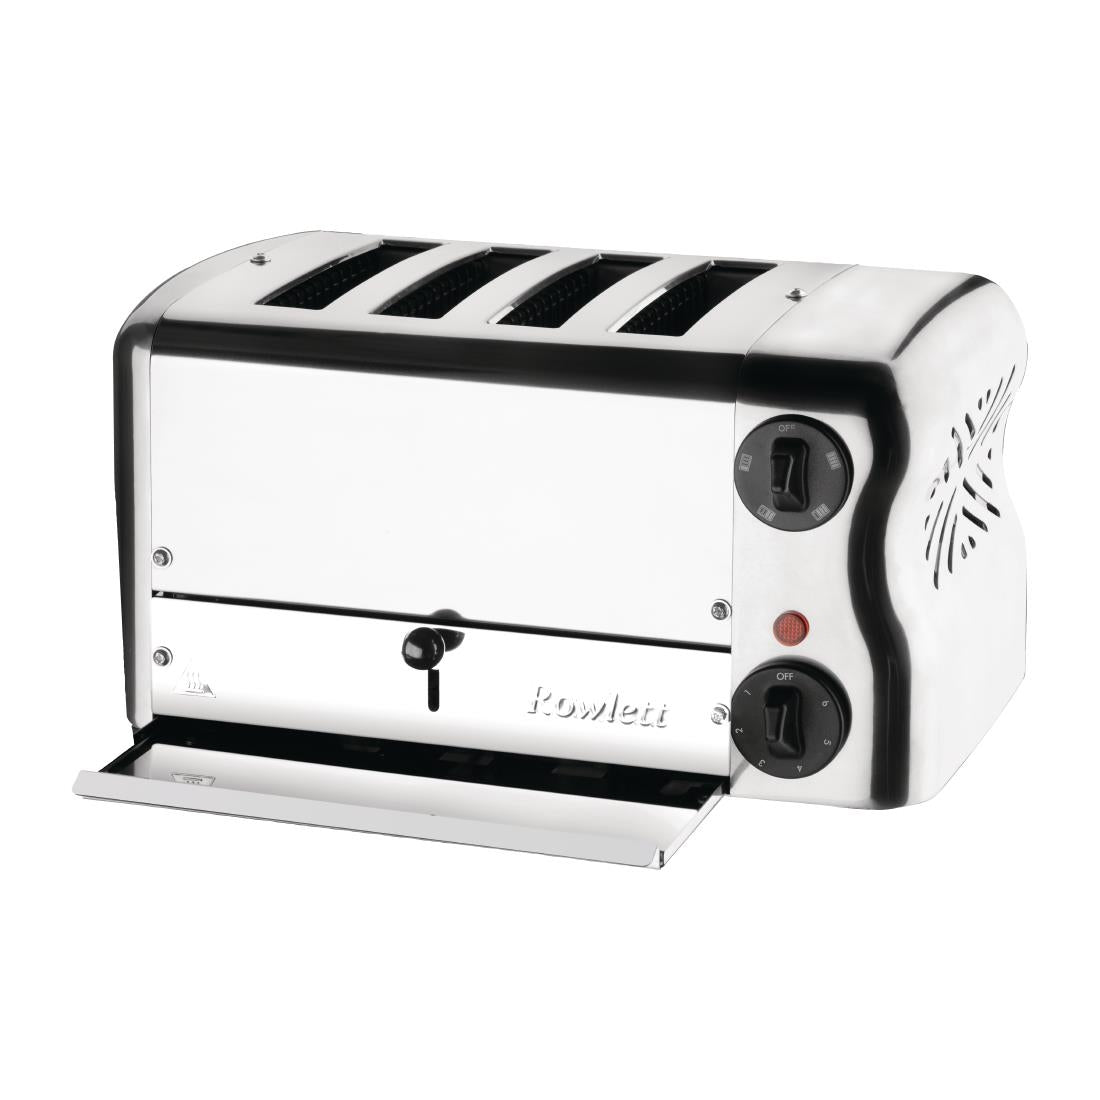 CH181 Rowlett Esprit 4 Slot Toaster Chrome w/2x Additional Elements & Sandwich Cage JD Catering Equipment Solutions Ltd